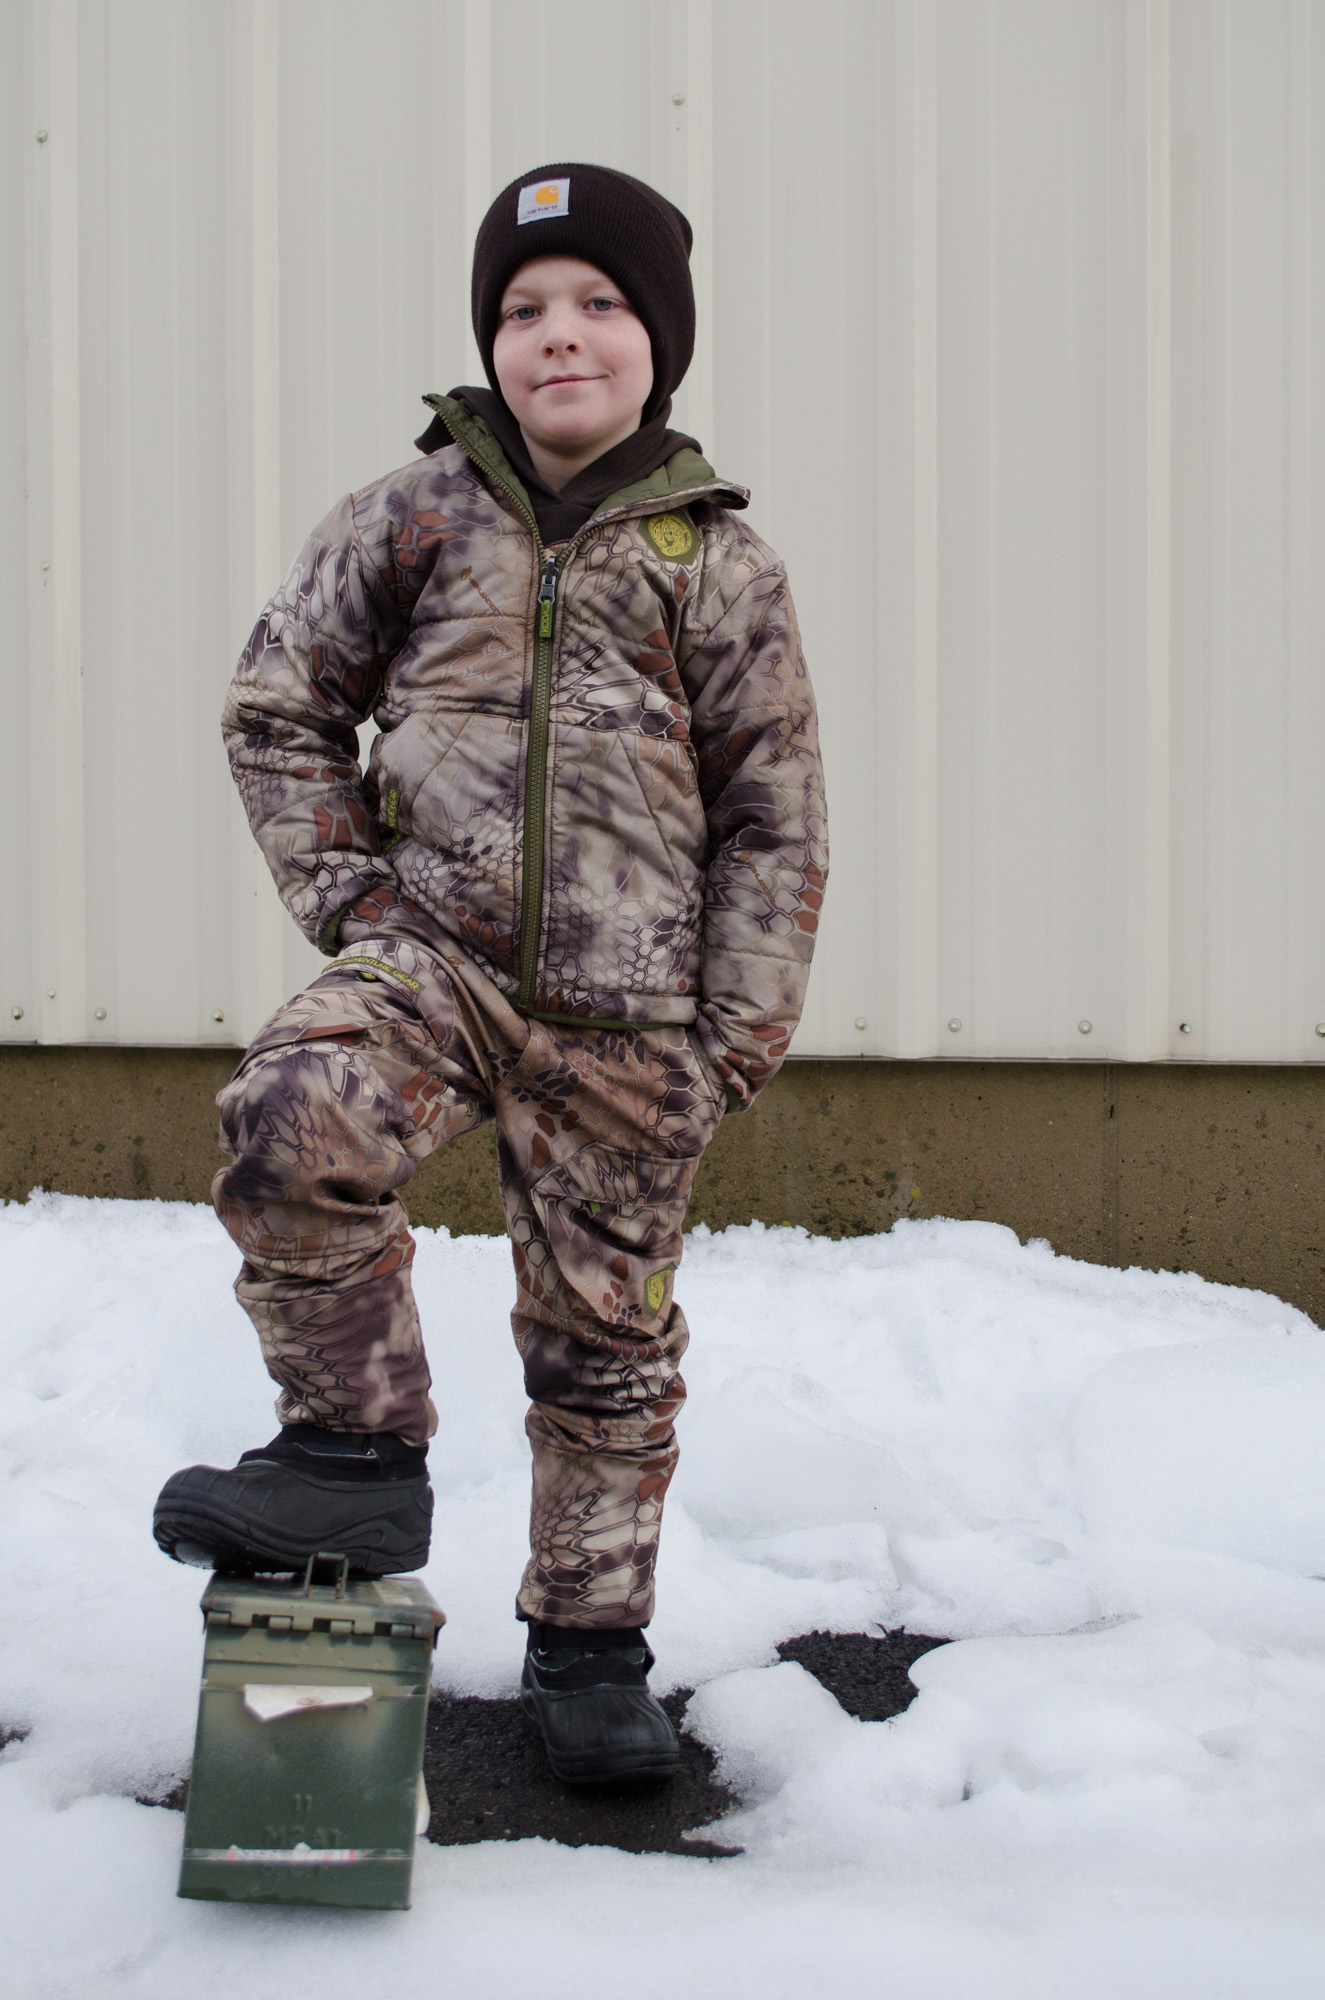 Keep 'em Cool in Camo: Kids' Camo! - Smith and Edwards Blog